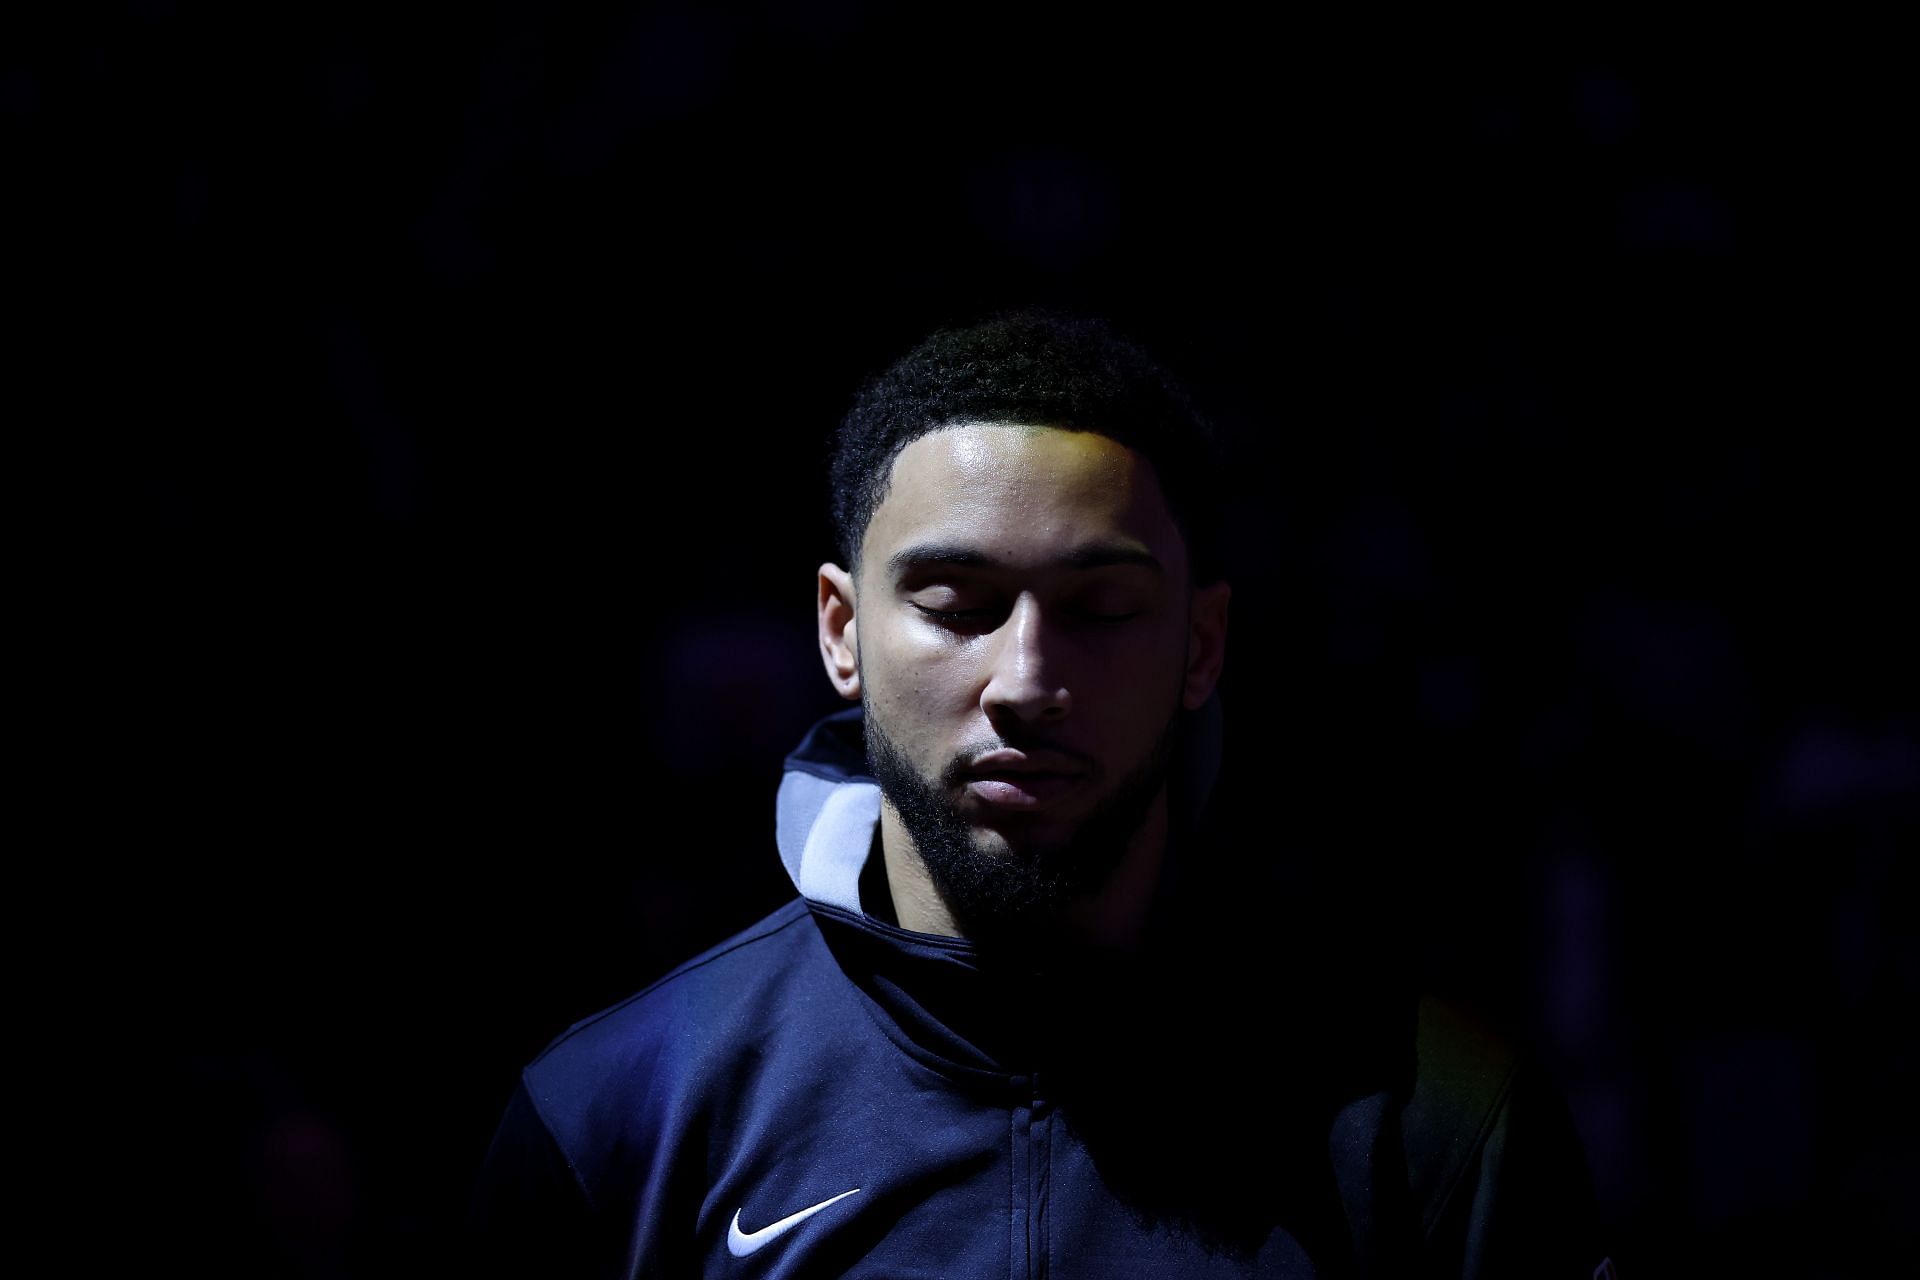 Nets have 'building' frustration surrounding Ben Simmons' availability and  level of play, per report 